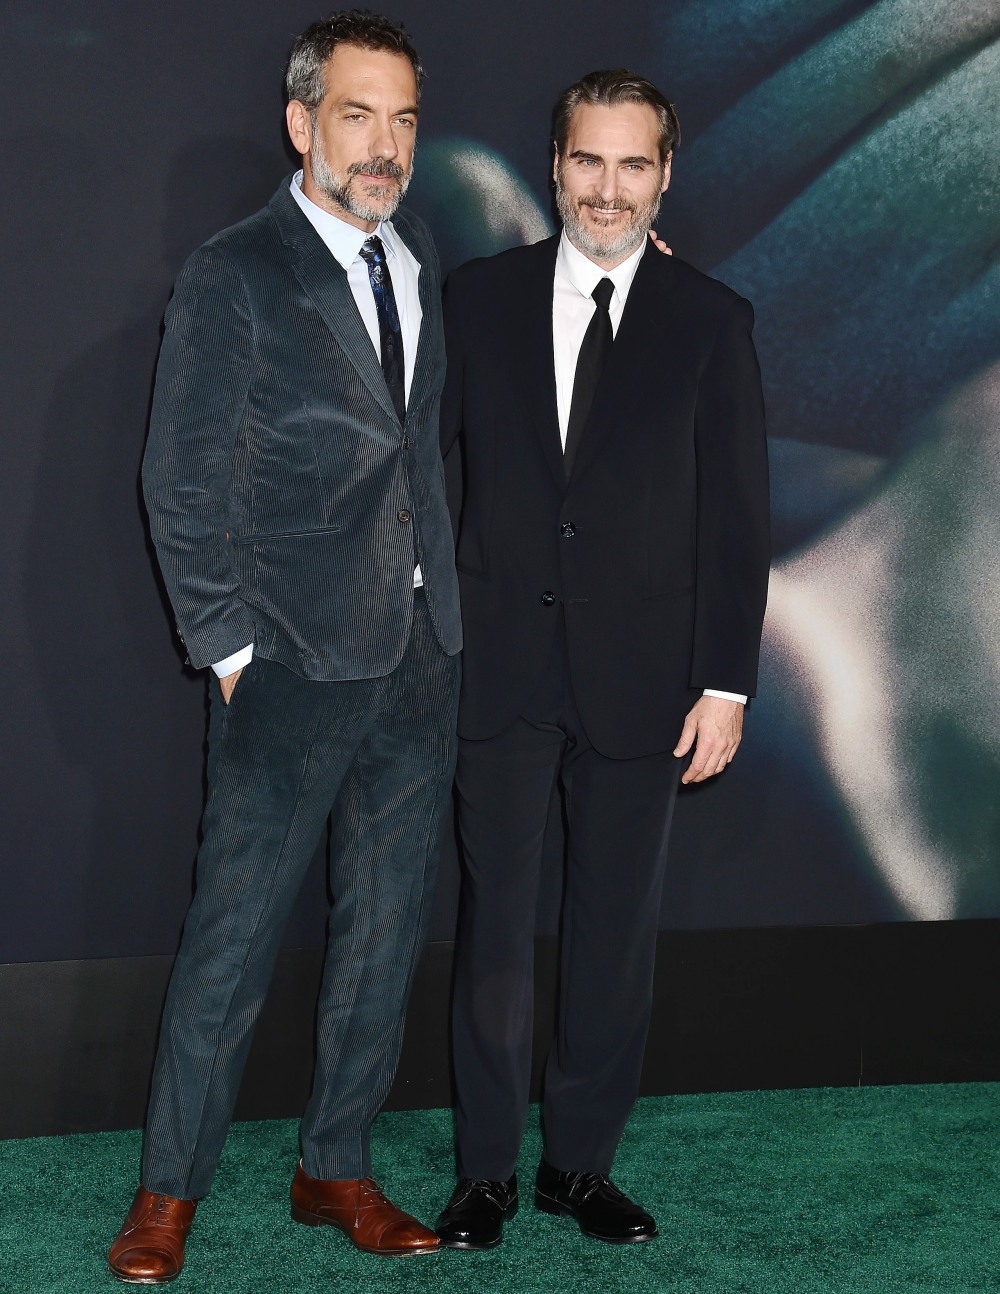 Todd Phillips, Joaquin Phoenix at the premiere of Warner Bros Pictures "Joker" held at TCL Chinese Theatre IMAX